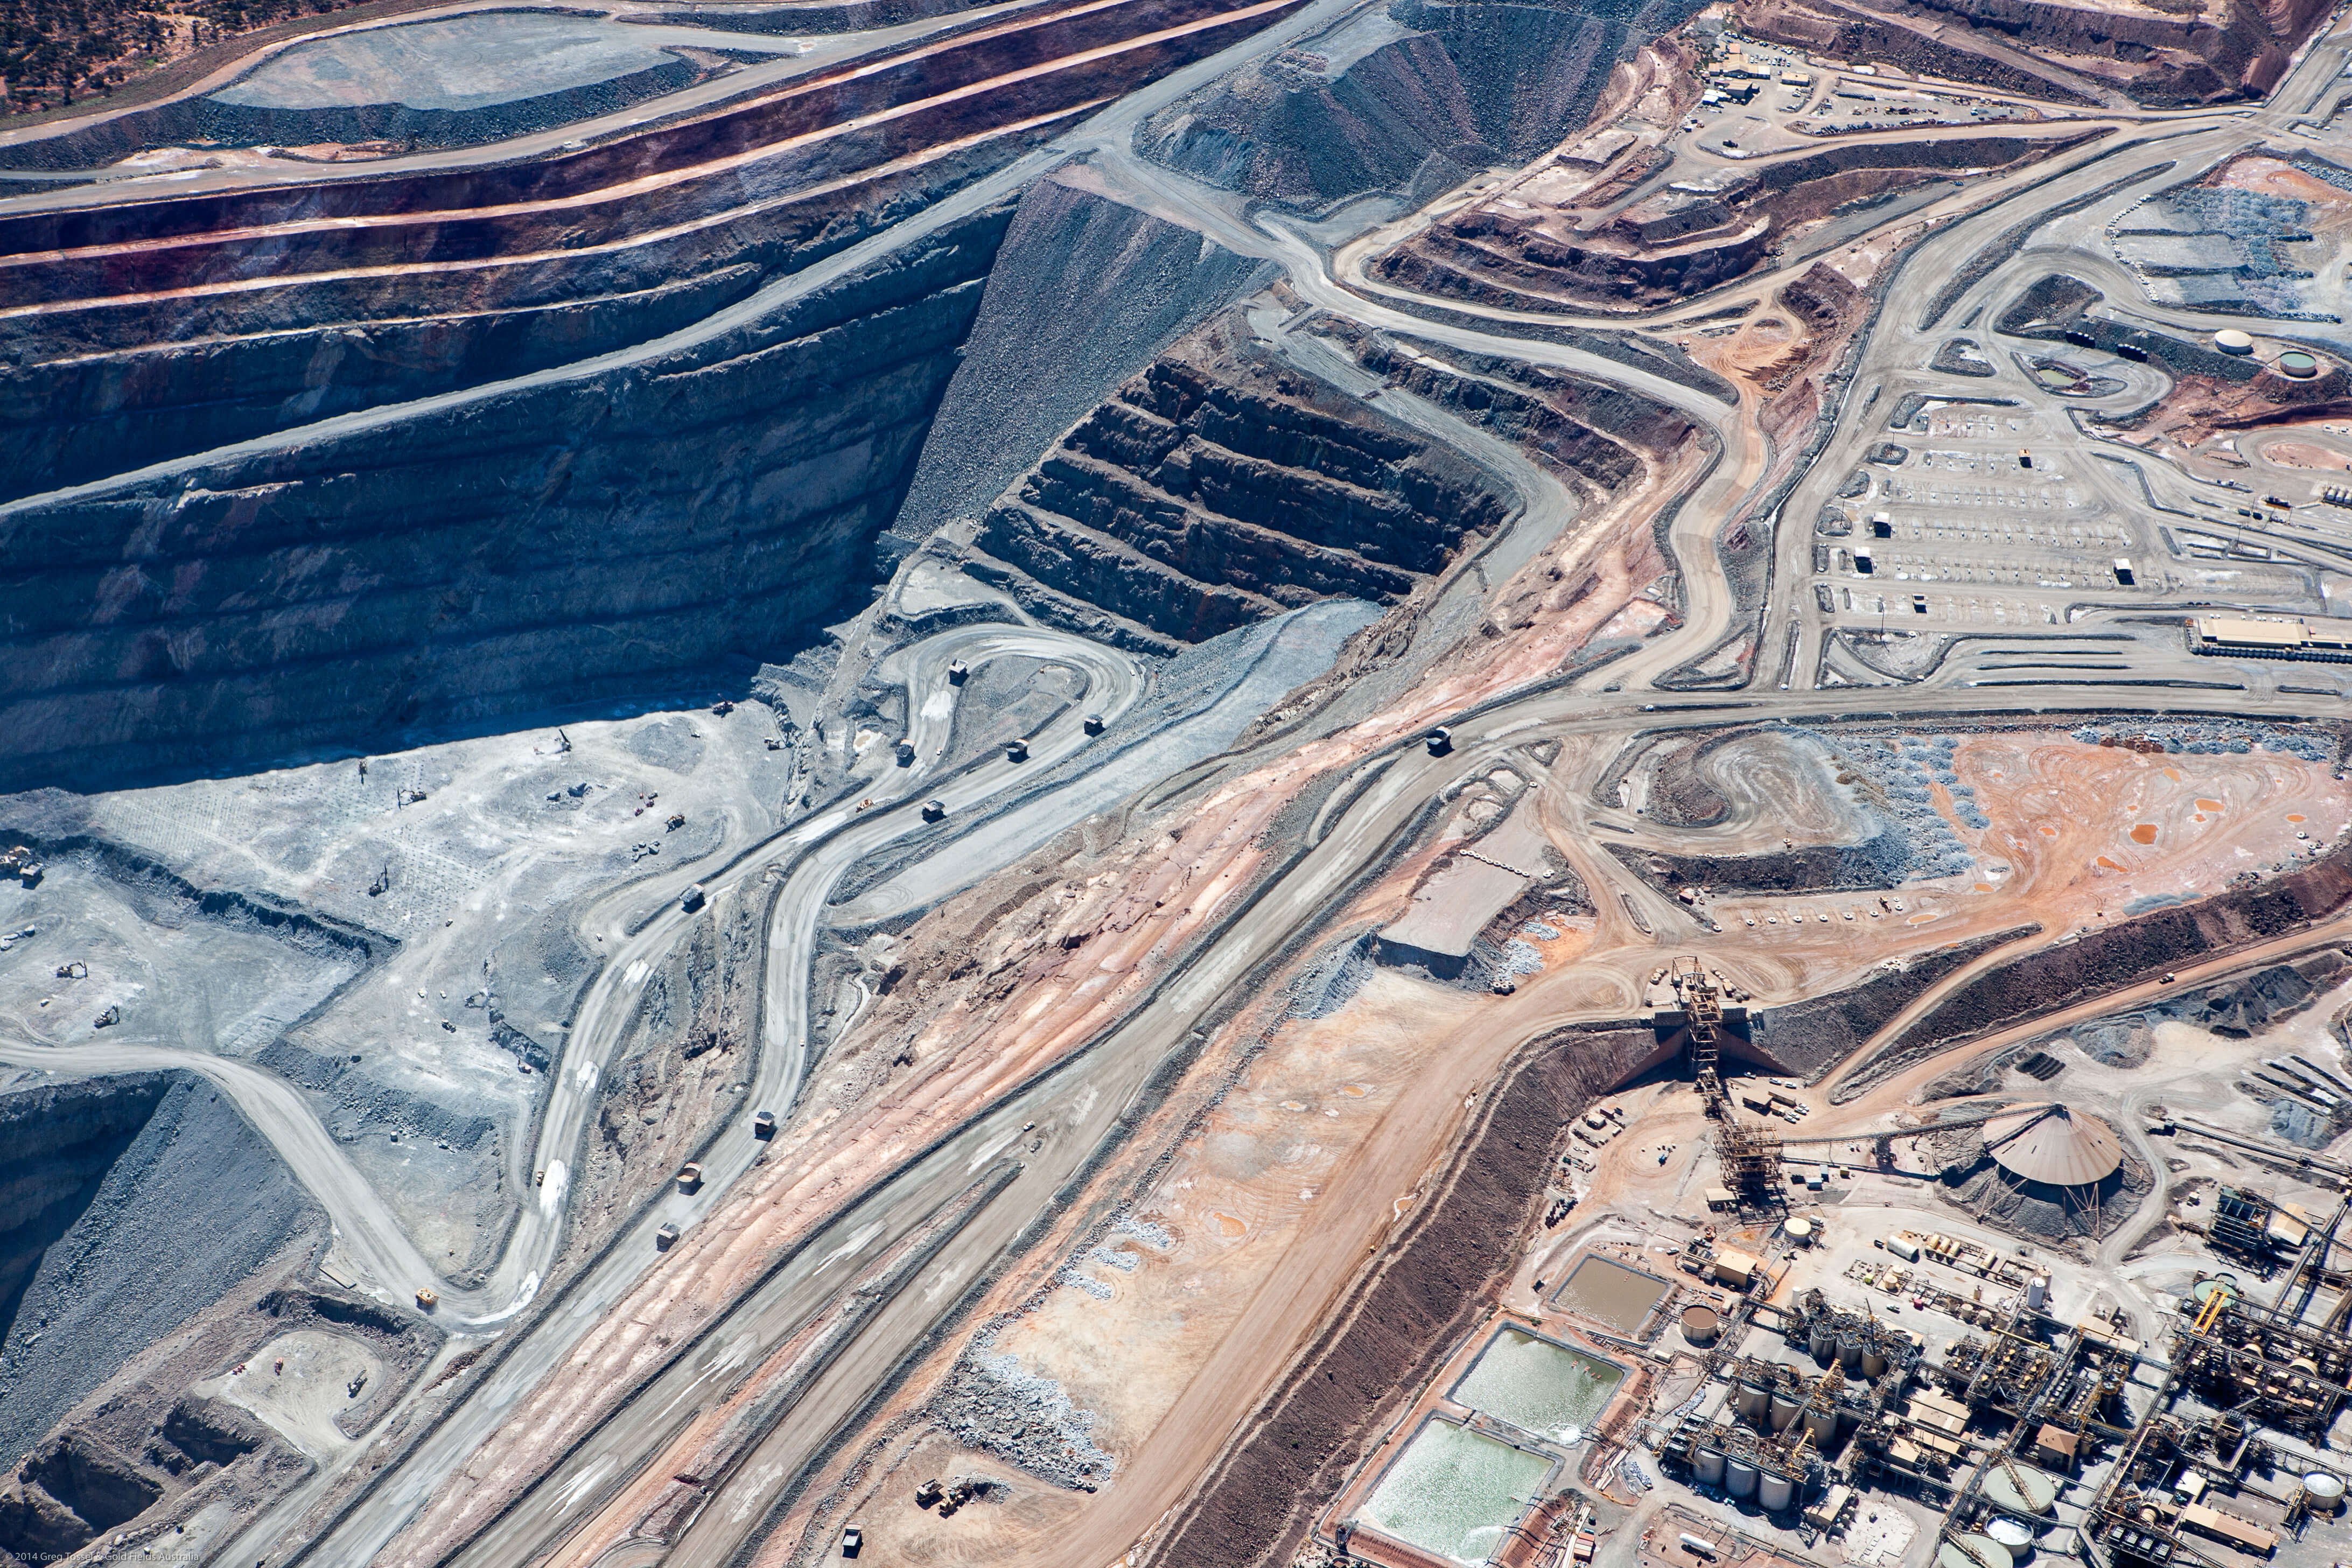 Australian mining has embraced technology, putting FIFO careers at the forefront of modern tech.